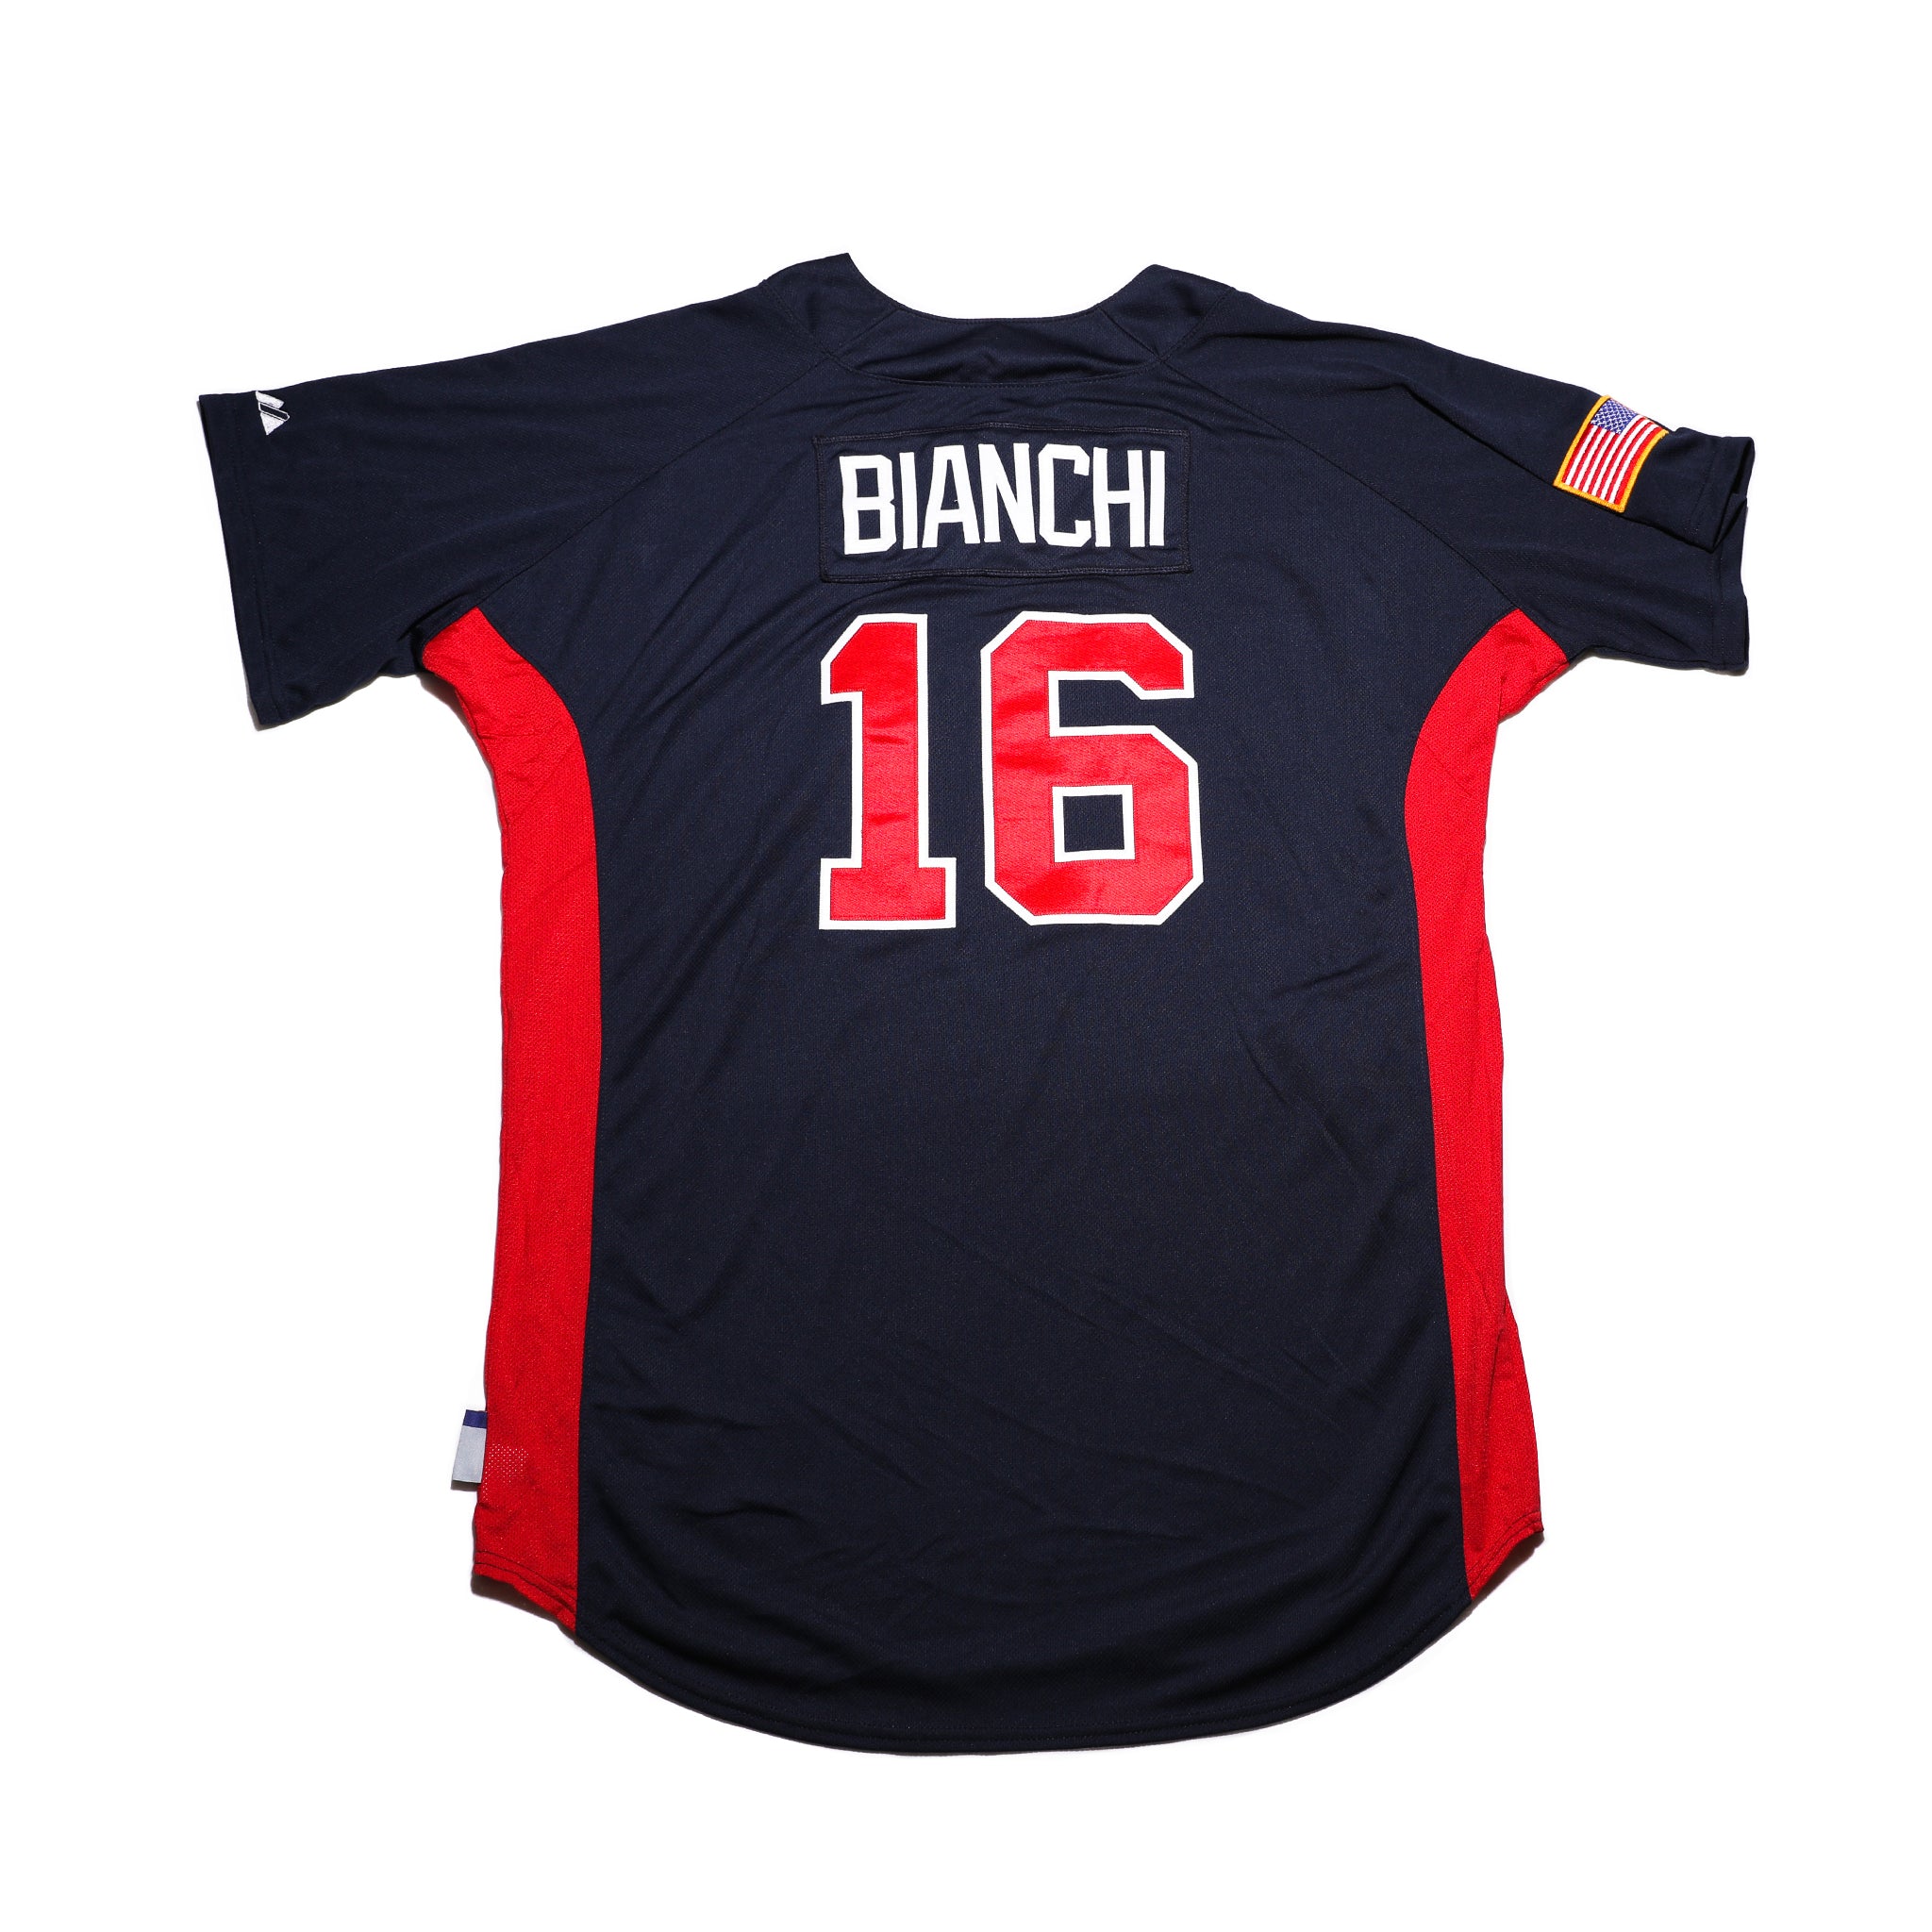 Red Sox Authentics: Jeff Bianchi Game-Used 2015 Memorial Day Road Jersey